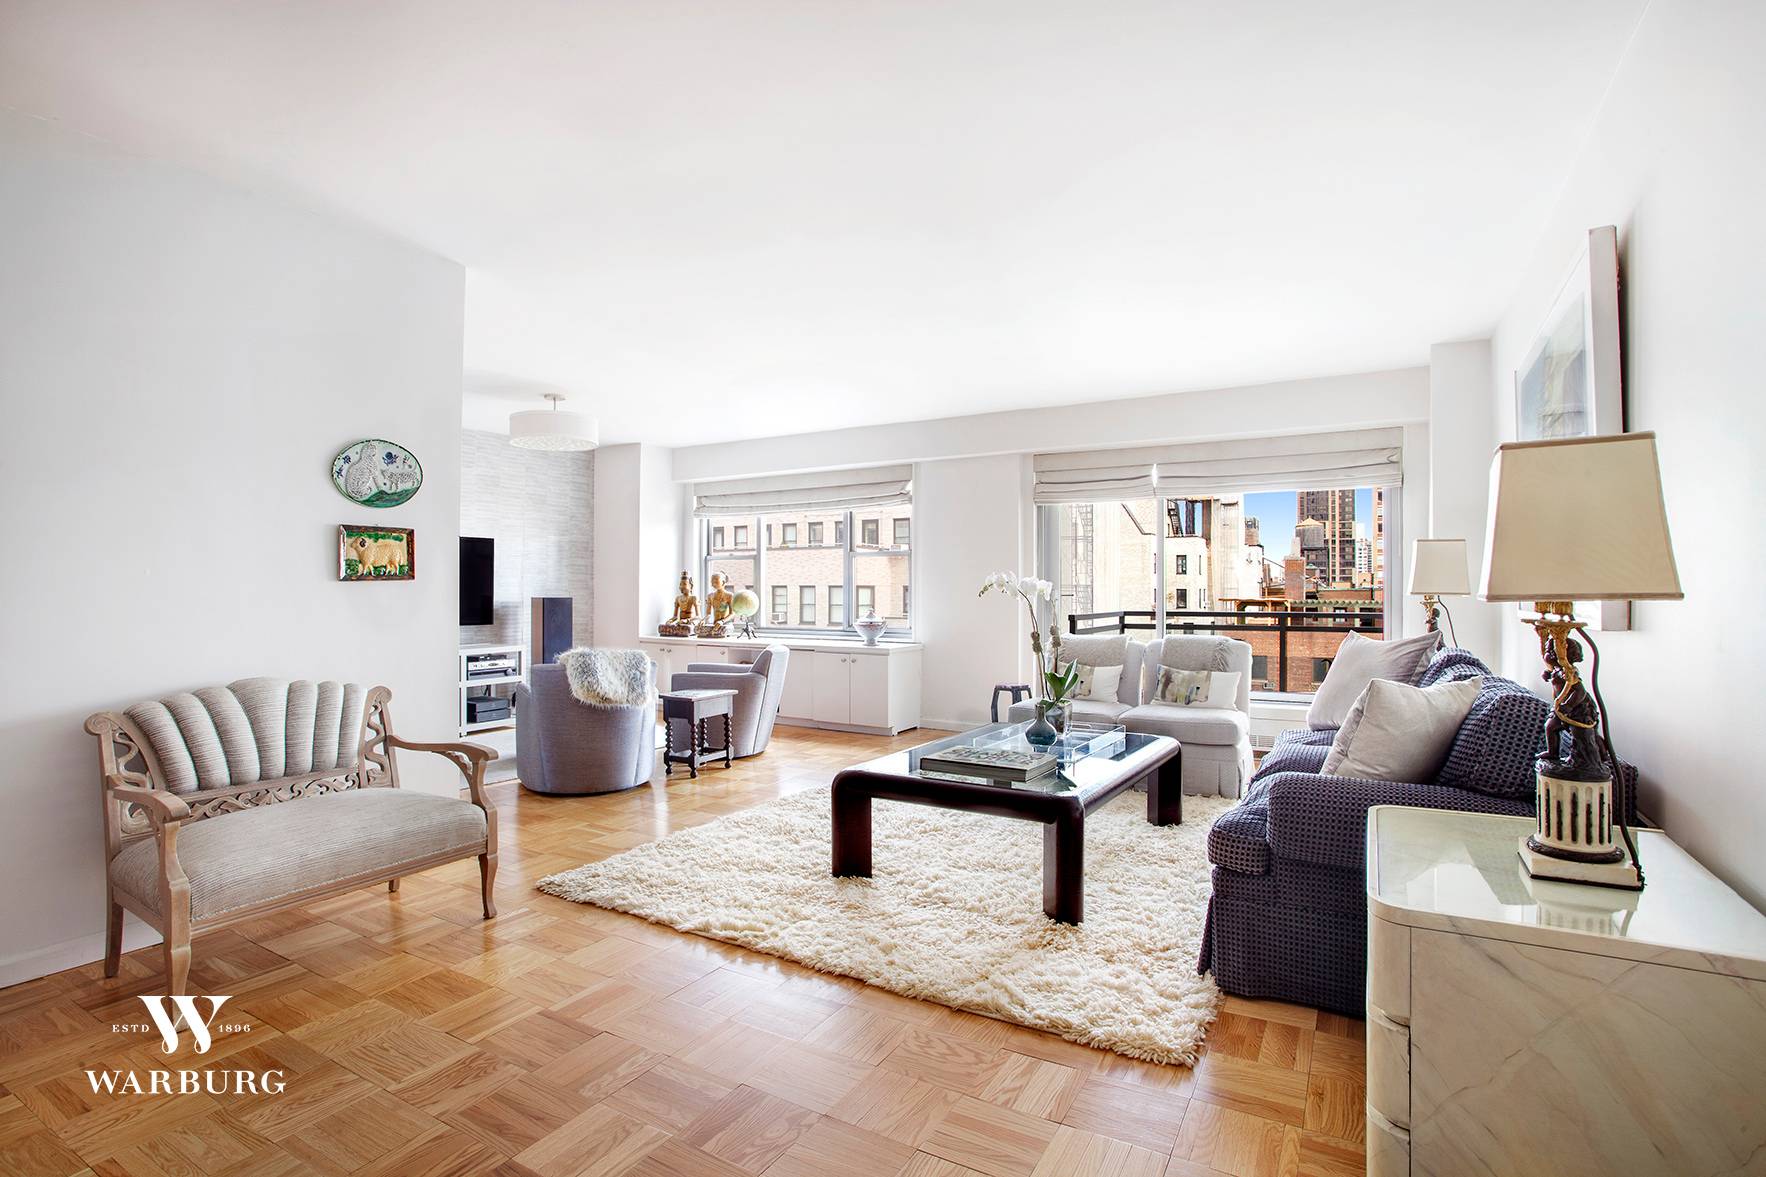 Apartment 20G at 400 East 56th, generously sized and renovated two bedroom, with two full baths and a spacious terrace offering city views and ample space for outdoor living.